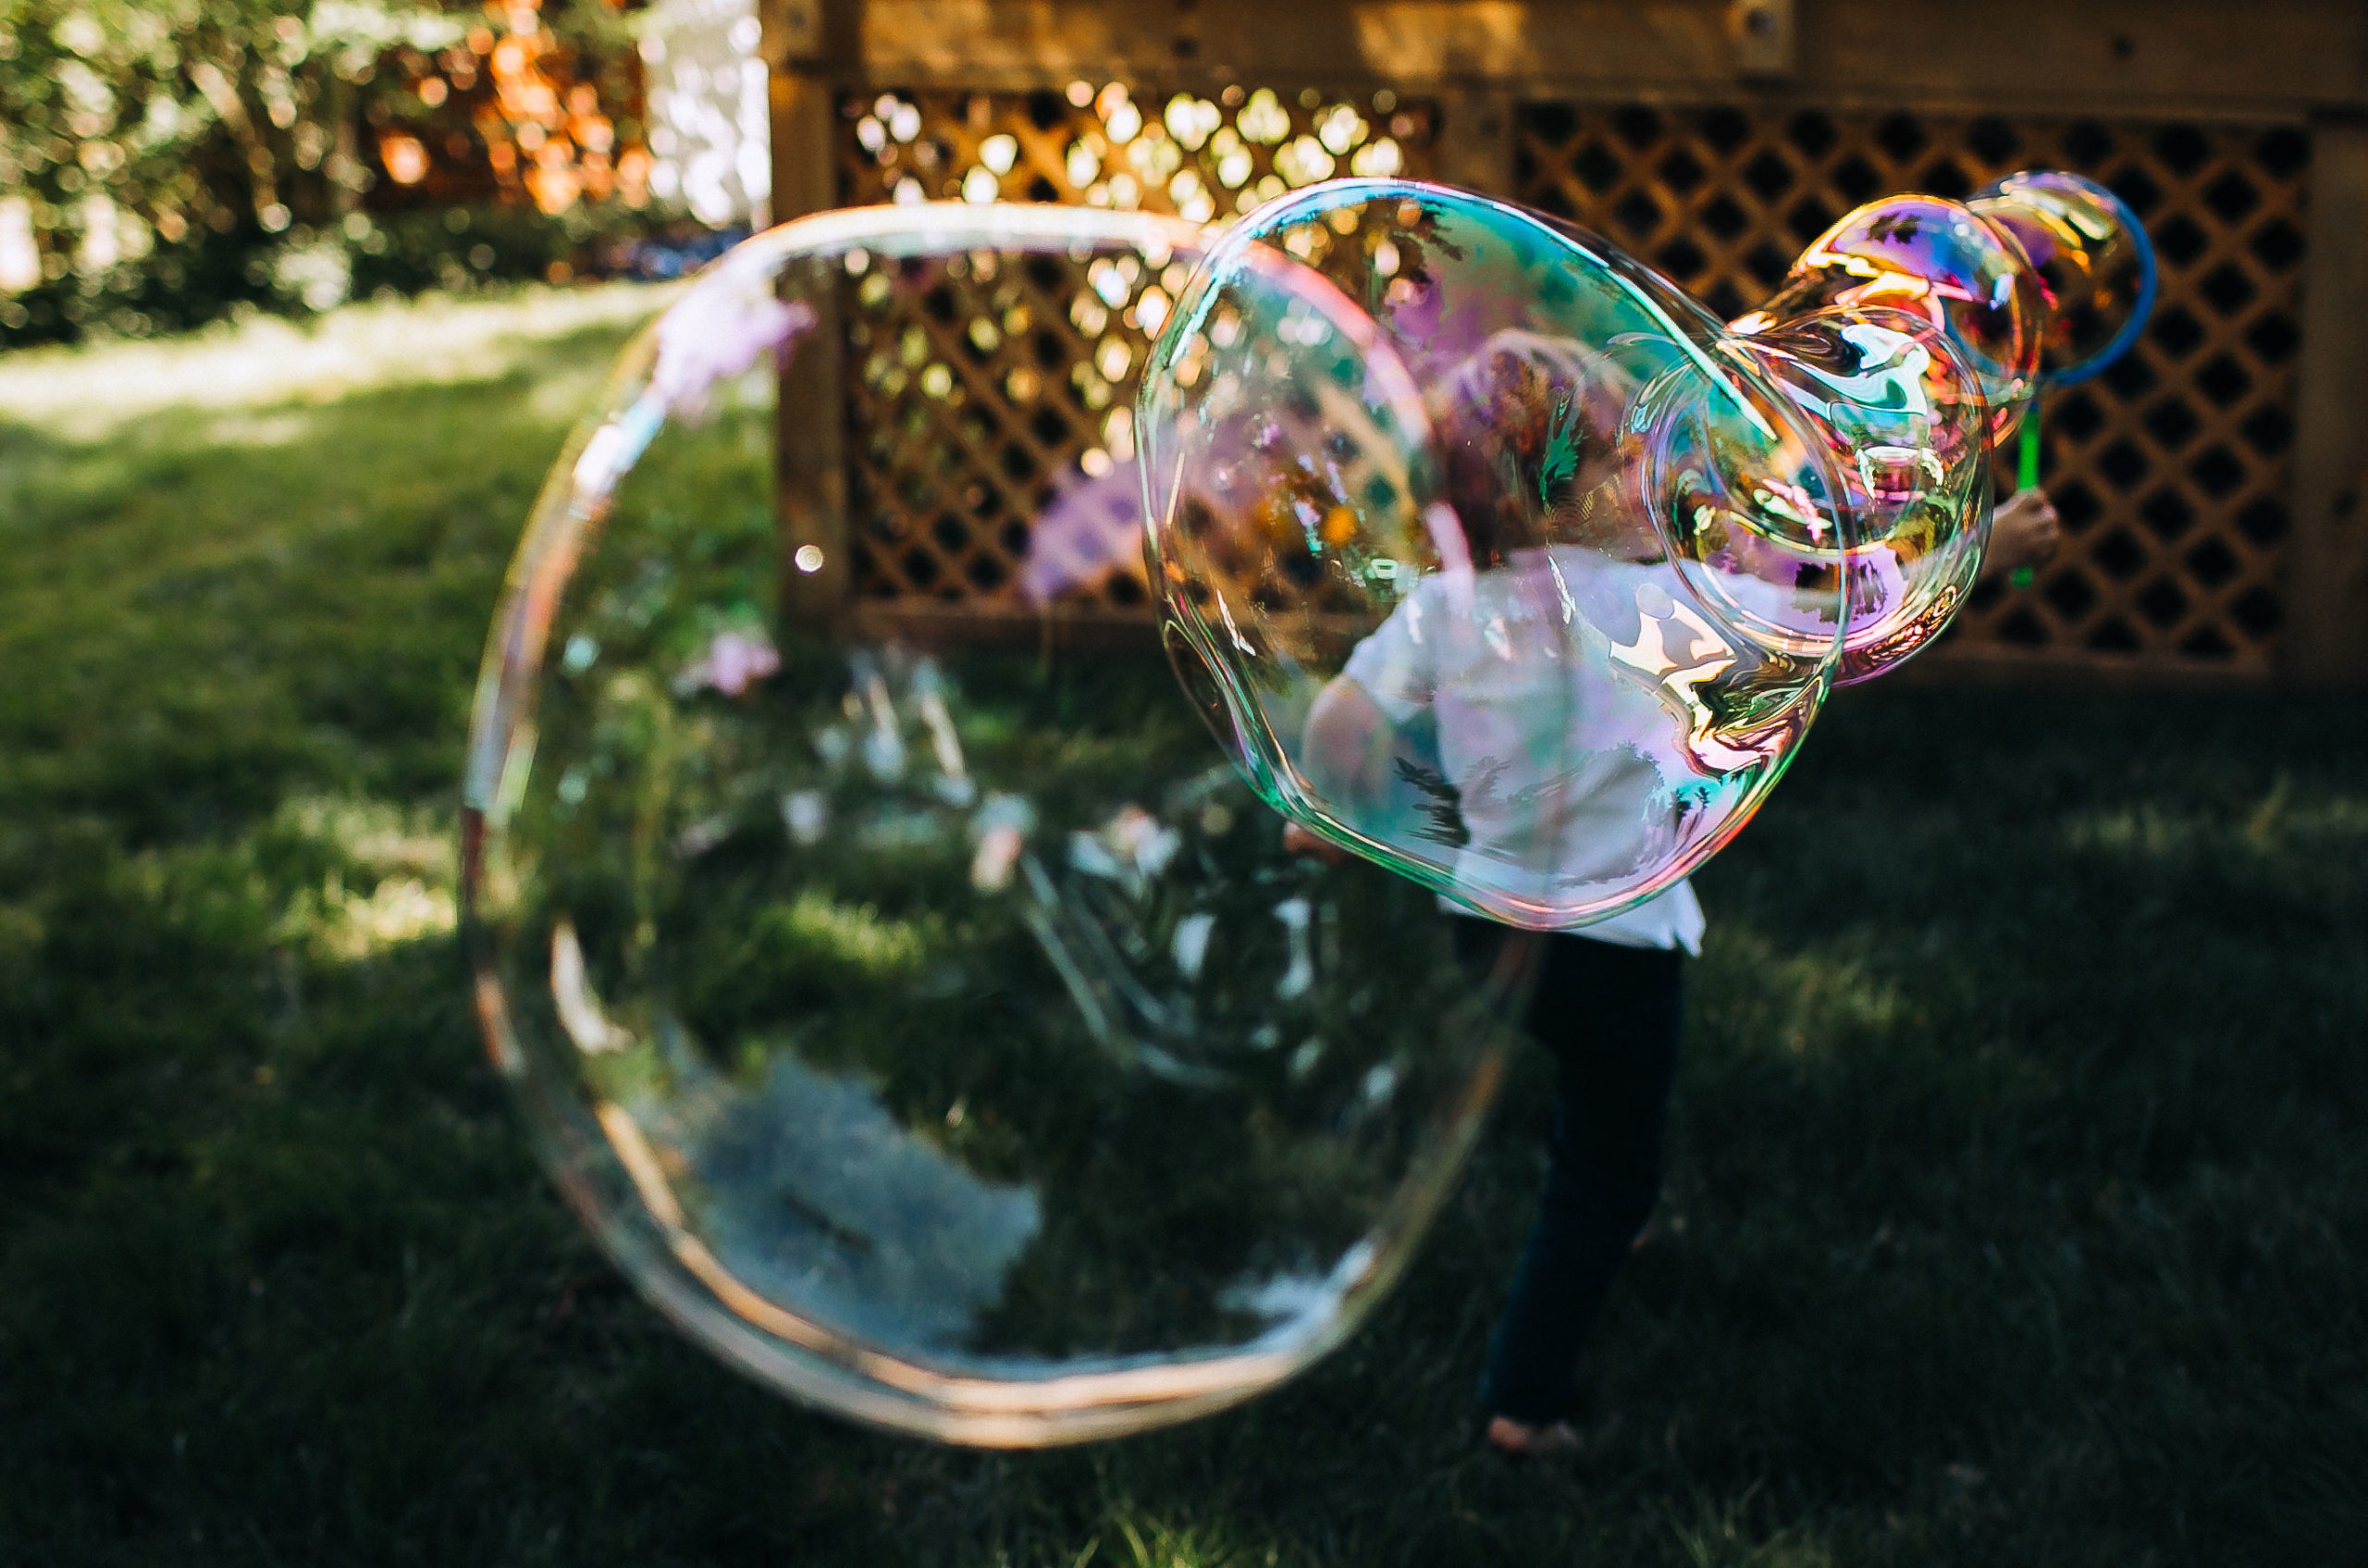 Image child running in a yard blowing bubbles